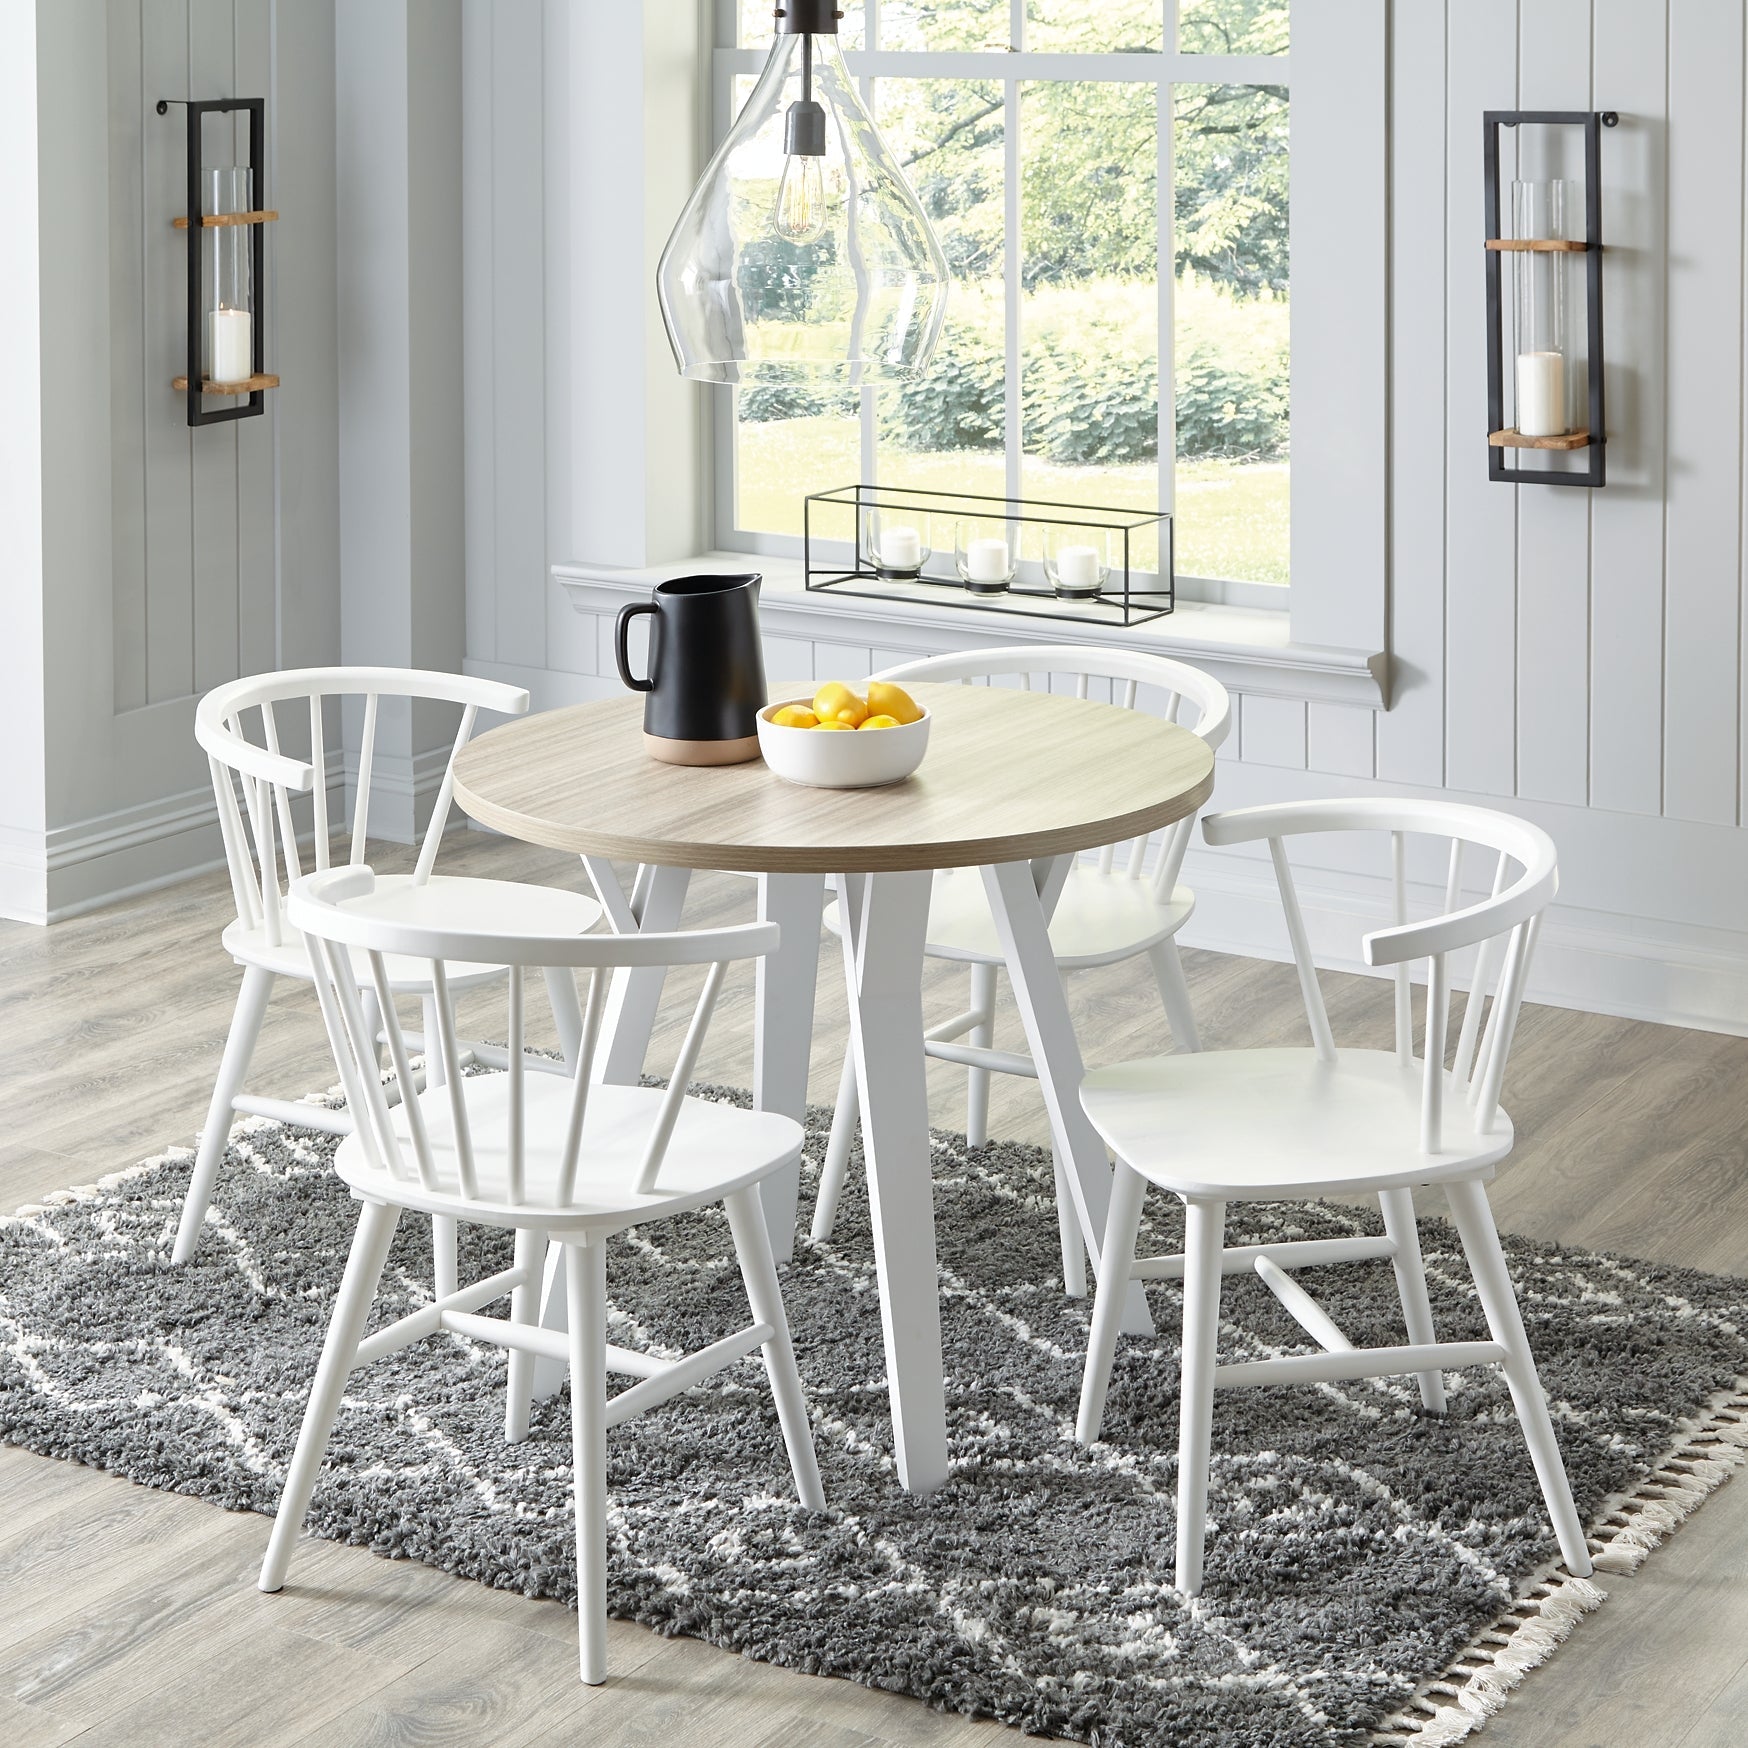 Grannen Dining Table and 4 Chairs at Cloud 9 Mattress & Furniture furniture, home furnishing, home decor